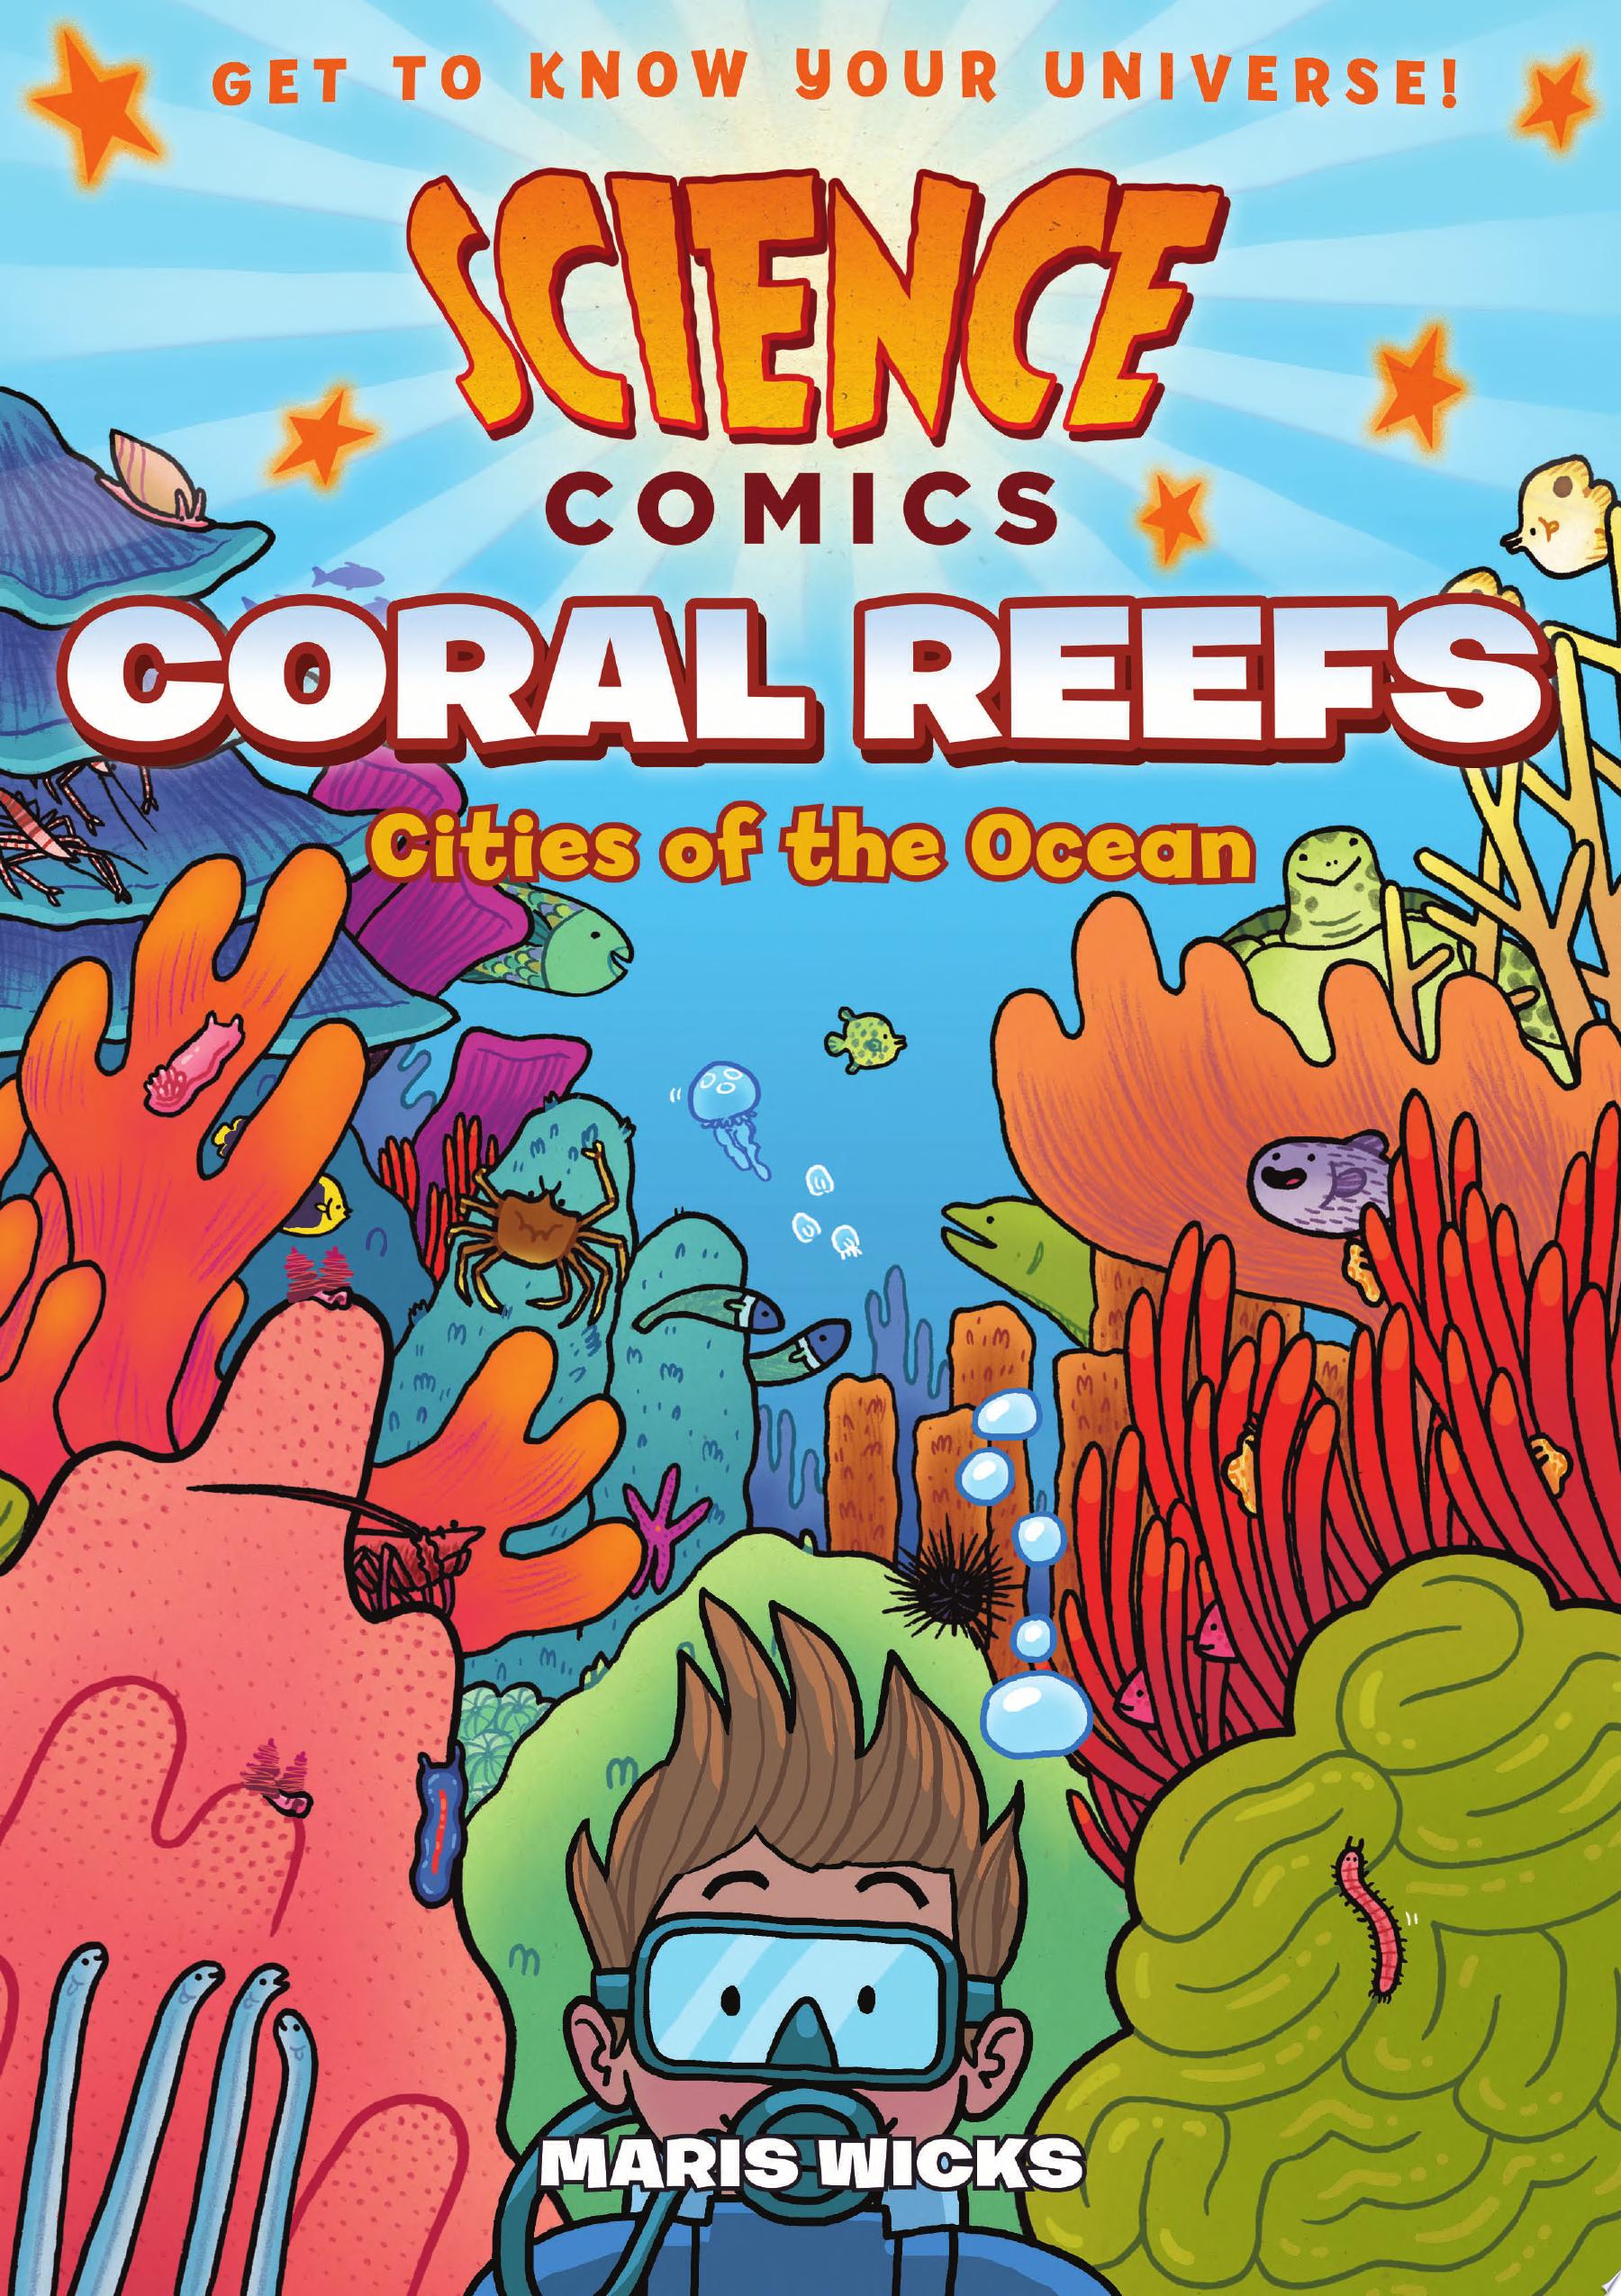 Image for "Science Comics: Coral Reefs"